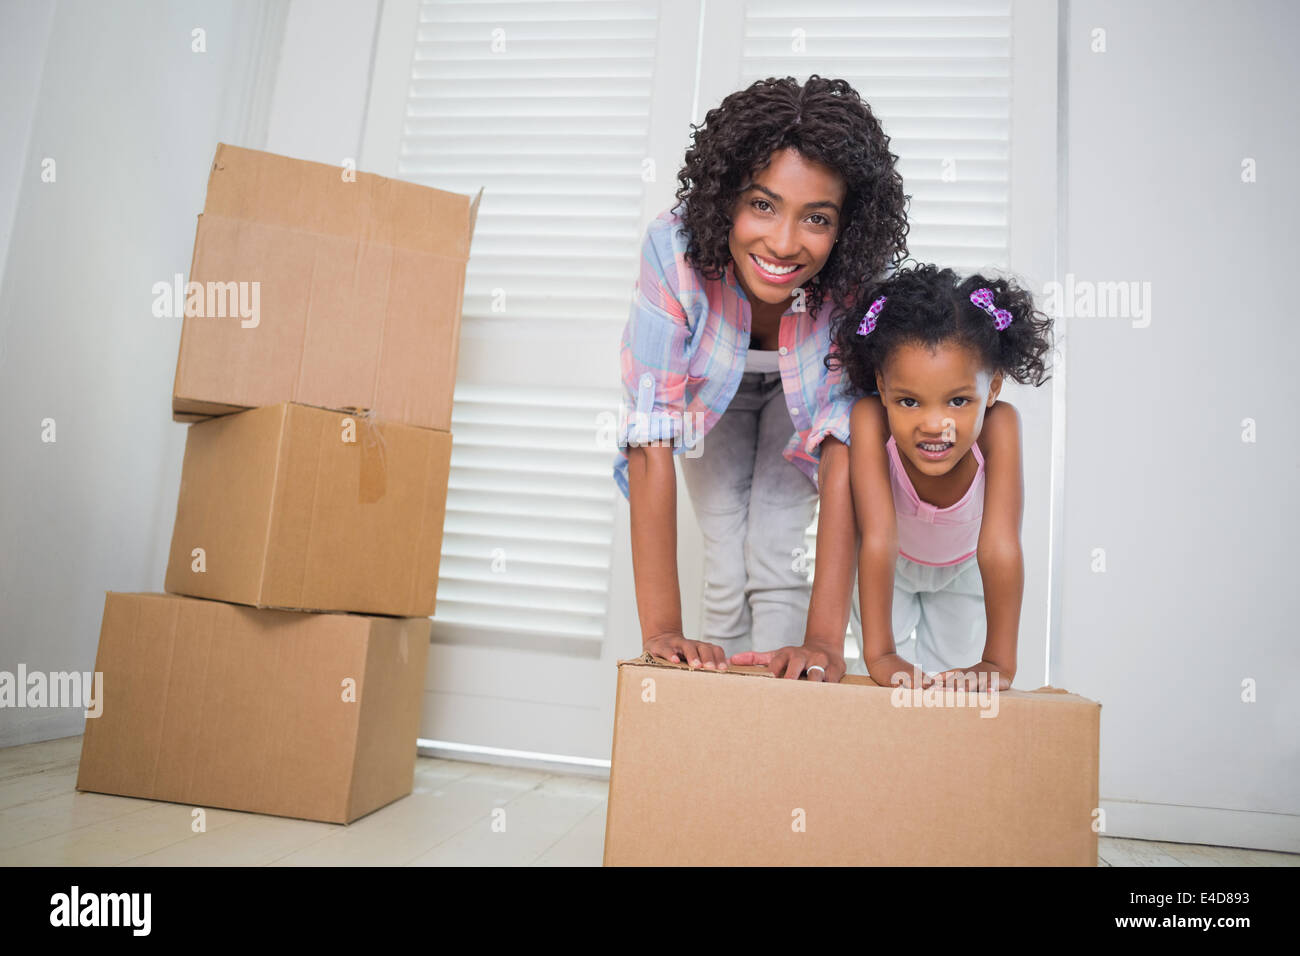 Cute daughter unpacking moving boxes with her mother Stock Photo